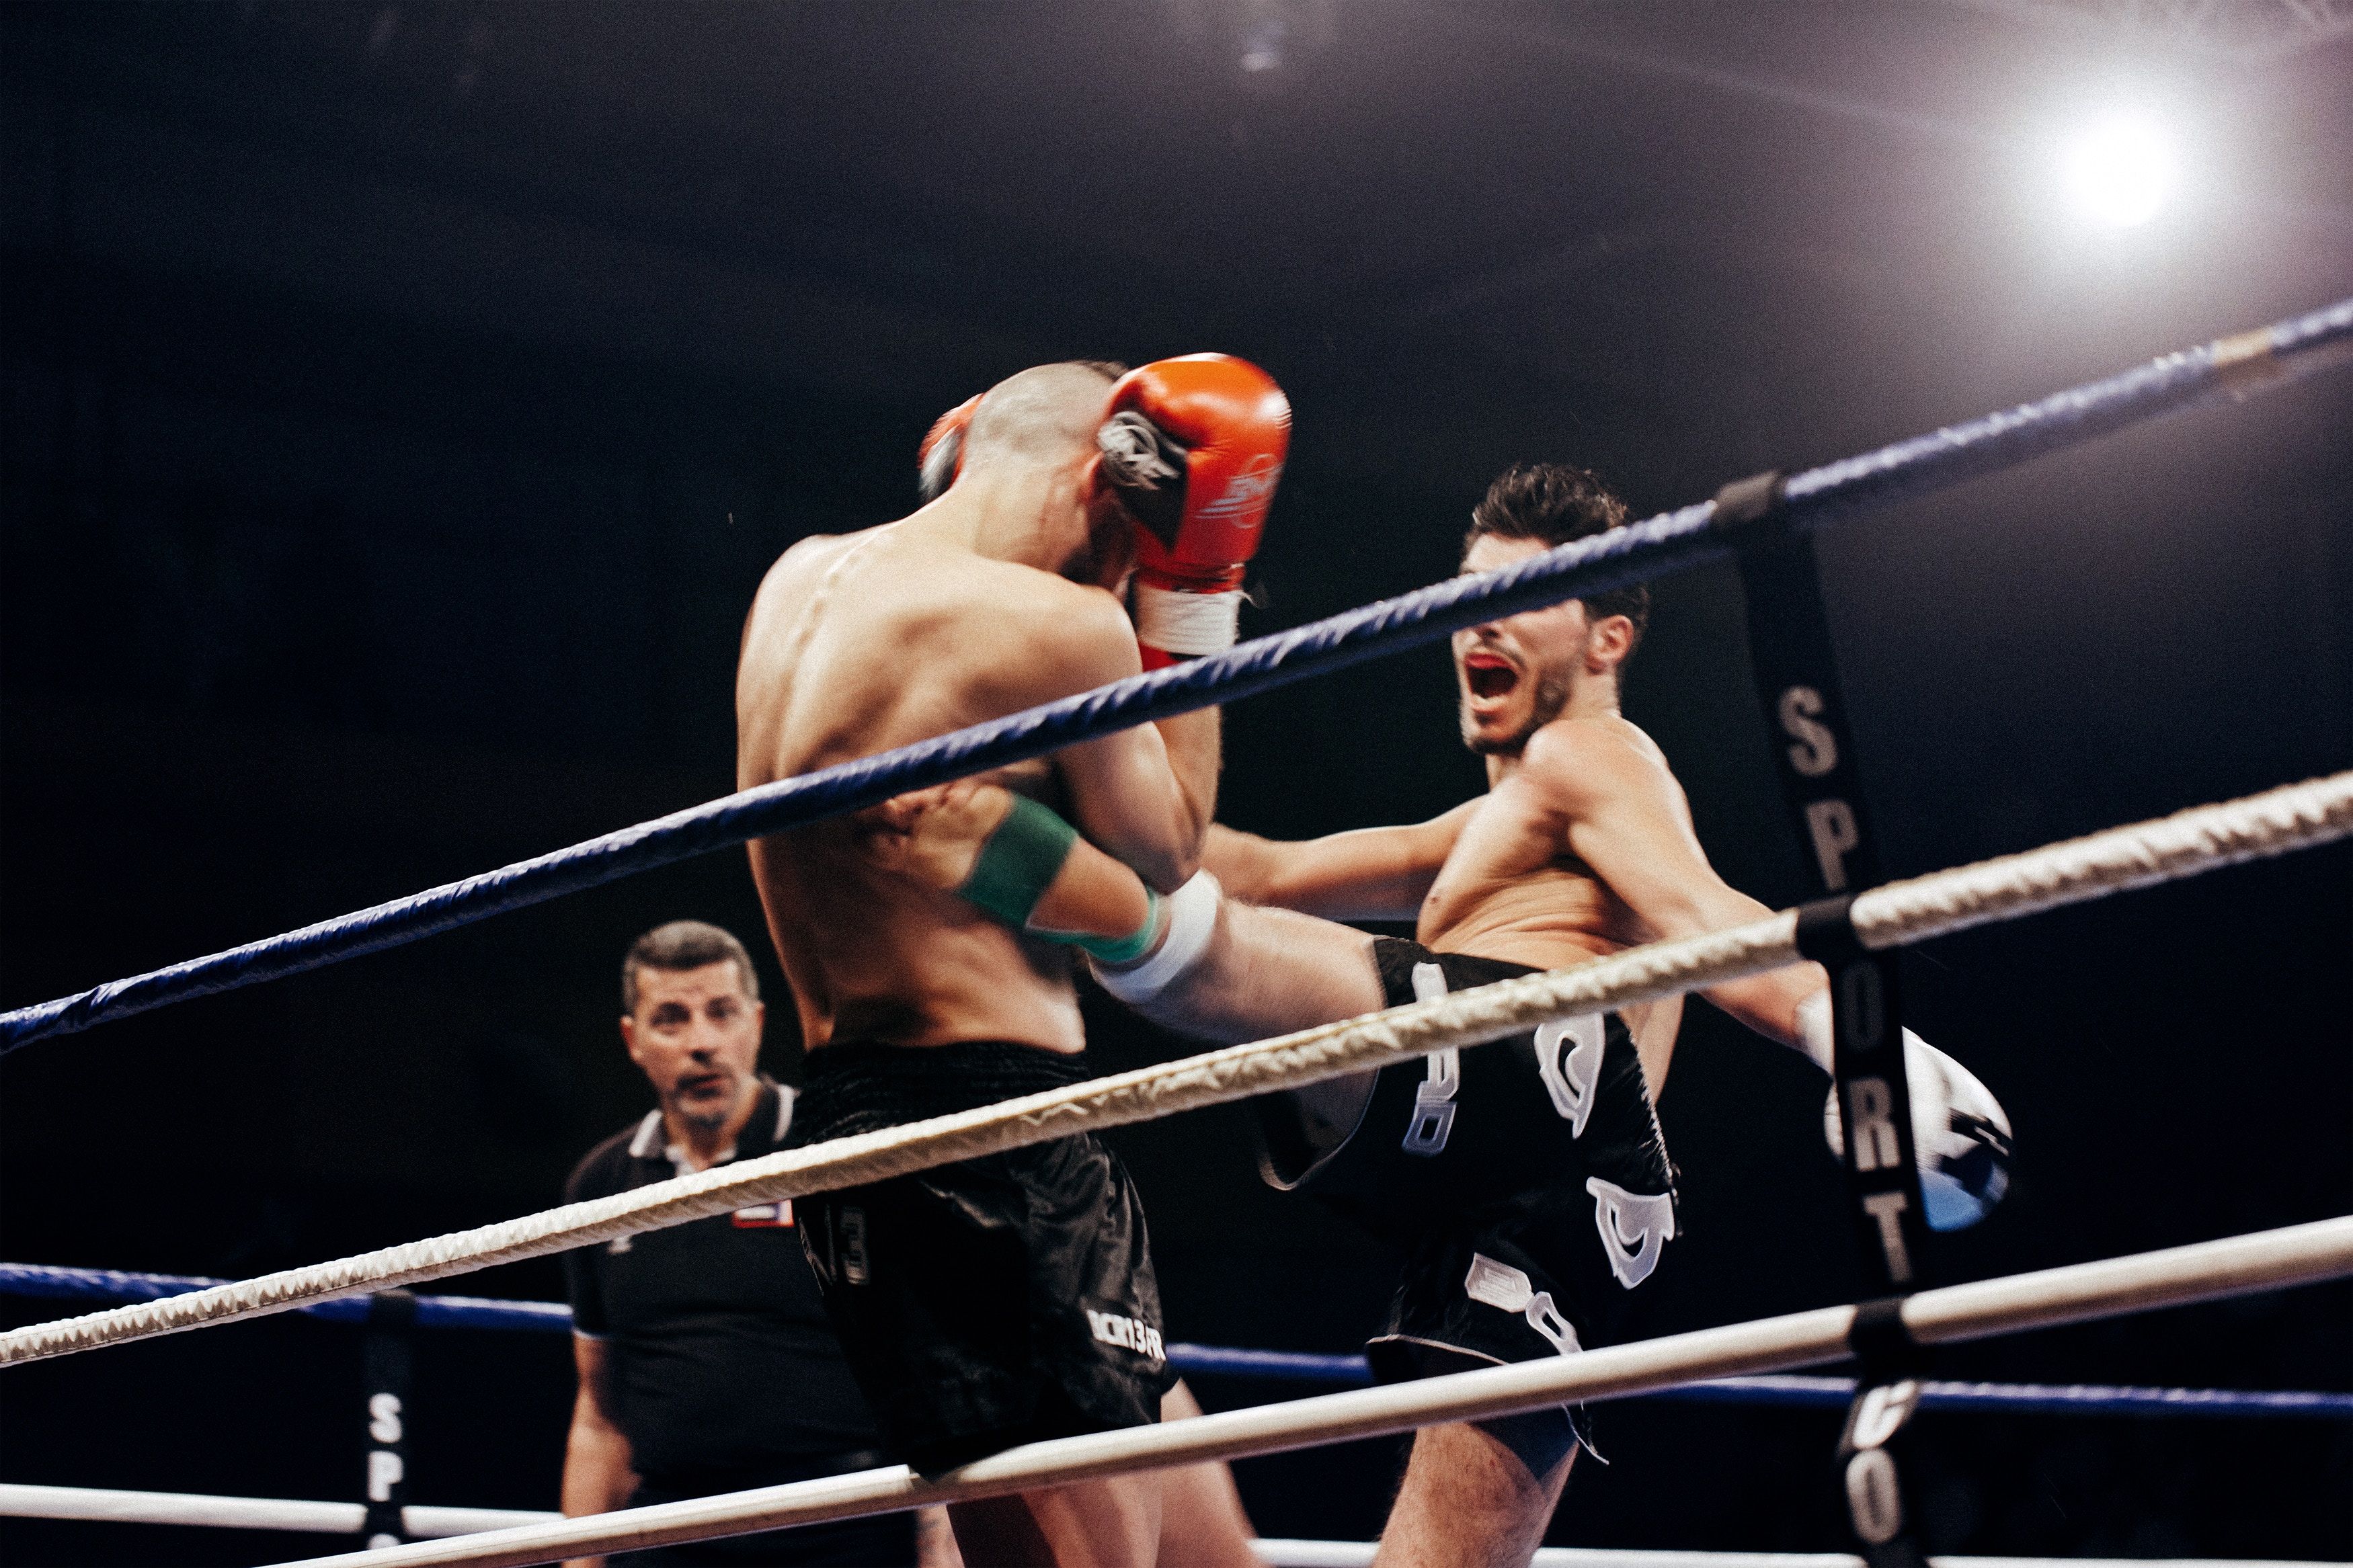 3500x2333 #marseille, #attack, #ring, #boxe, #fight, #male, #contact, #glove, #boxer, #boxing, #defend, #kickboxer, #kick, #kickboxing, #sport, #man, #france, #Public domain image, #fighter, #fighting, #athlete. Mocah.org HD Desktop Wallpaper